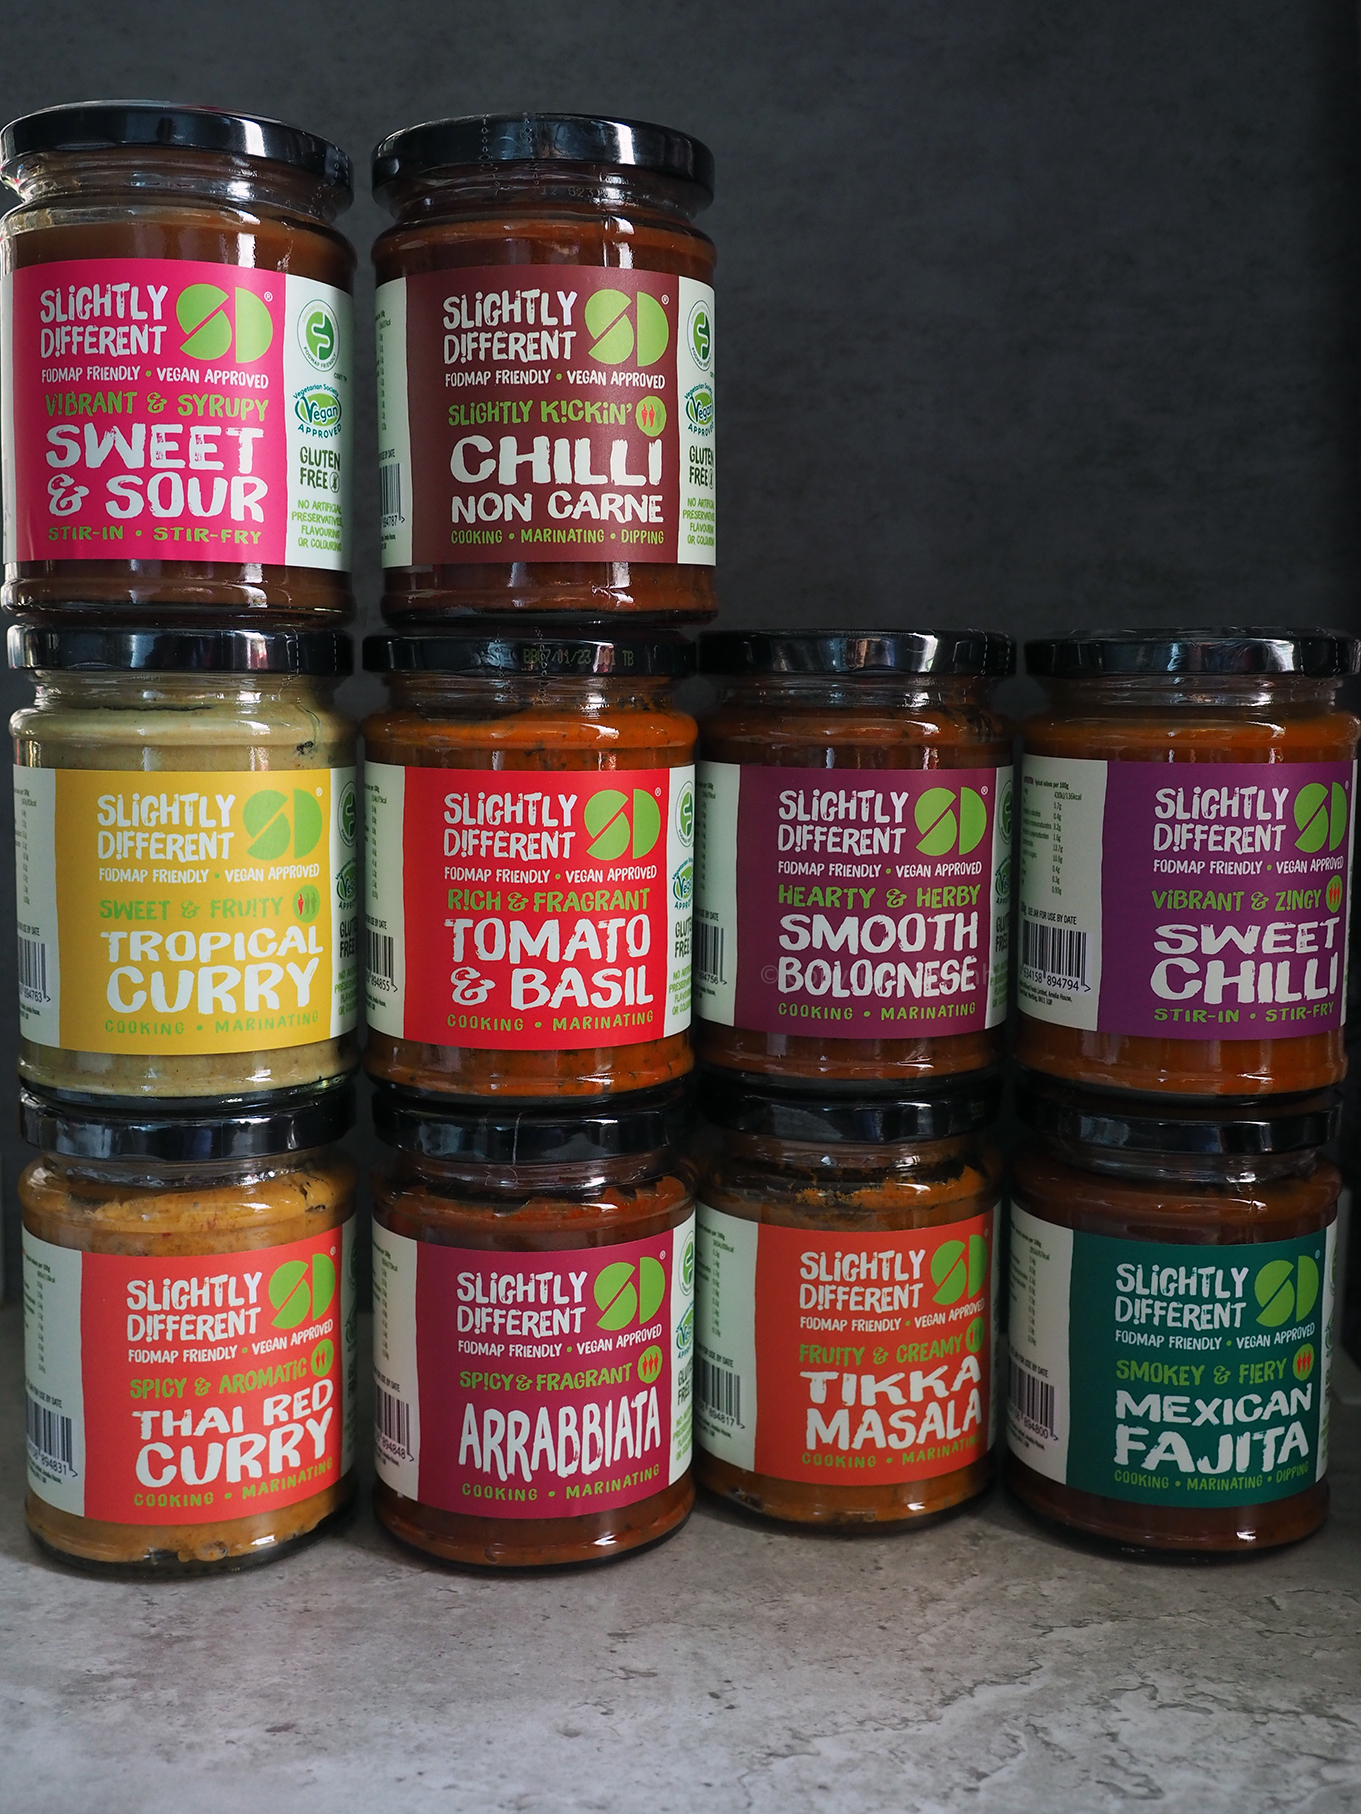 Around The World Slightly Different 10 Pack of Cooking Sauces